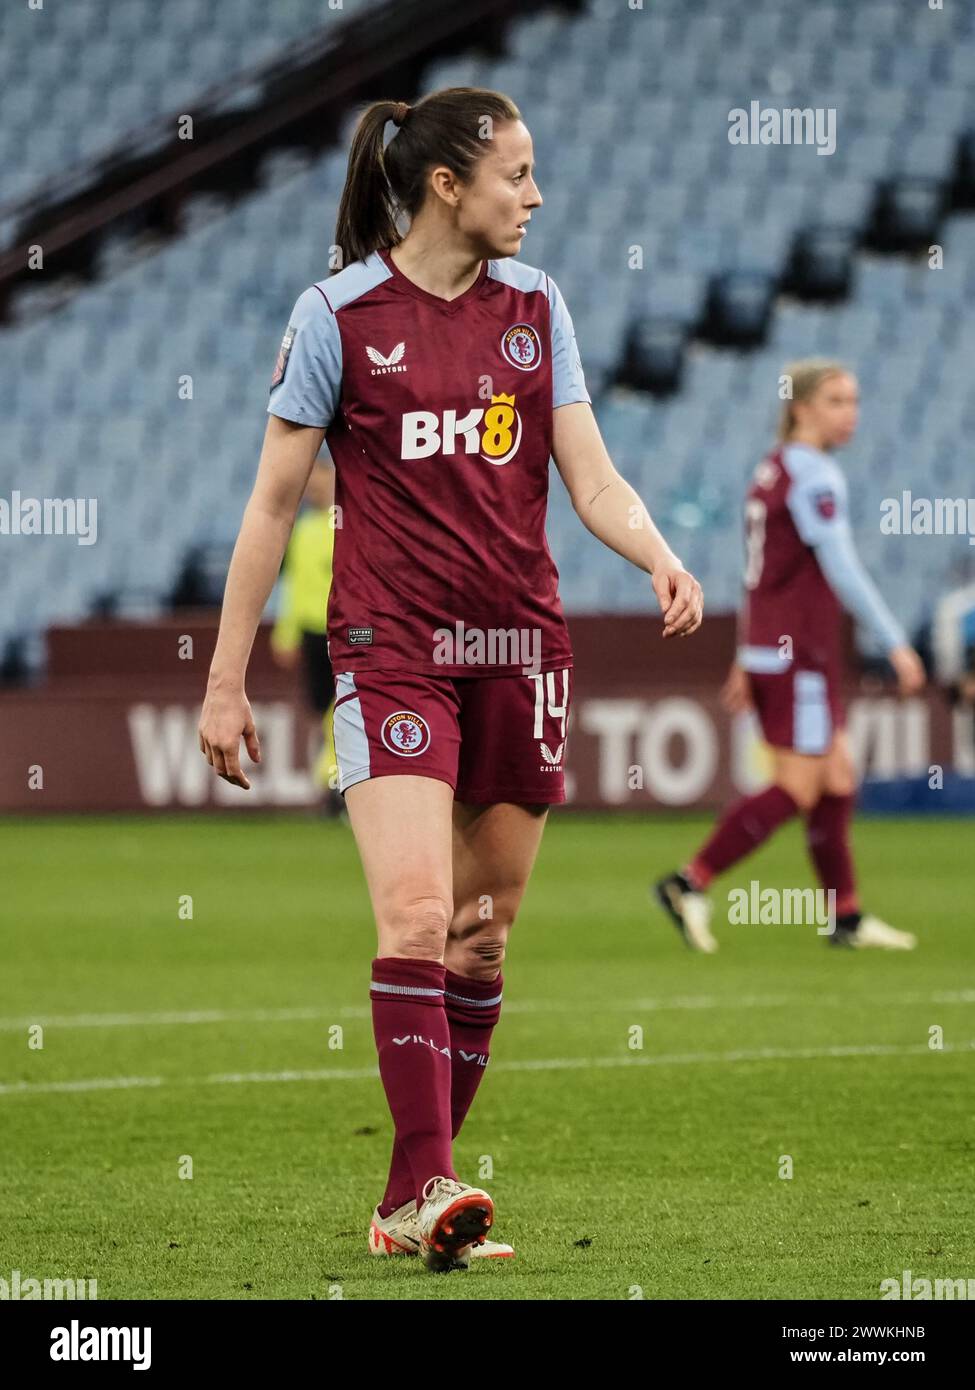 Birmingham, UK. 24th Mar, 2024. Birmingham, England, March 24th 2024: Danielle Turner (14 Aston Villa) in action during the Barclays FA Womens Super League game between Aston Villa and Arsenal at Villa Park in Birmingham, England (Natalie Mincher/SPP) Credit: SPP Sport Press Photo. /Alamy Live News Stock Photo